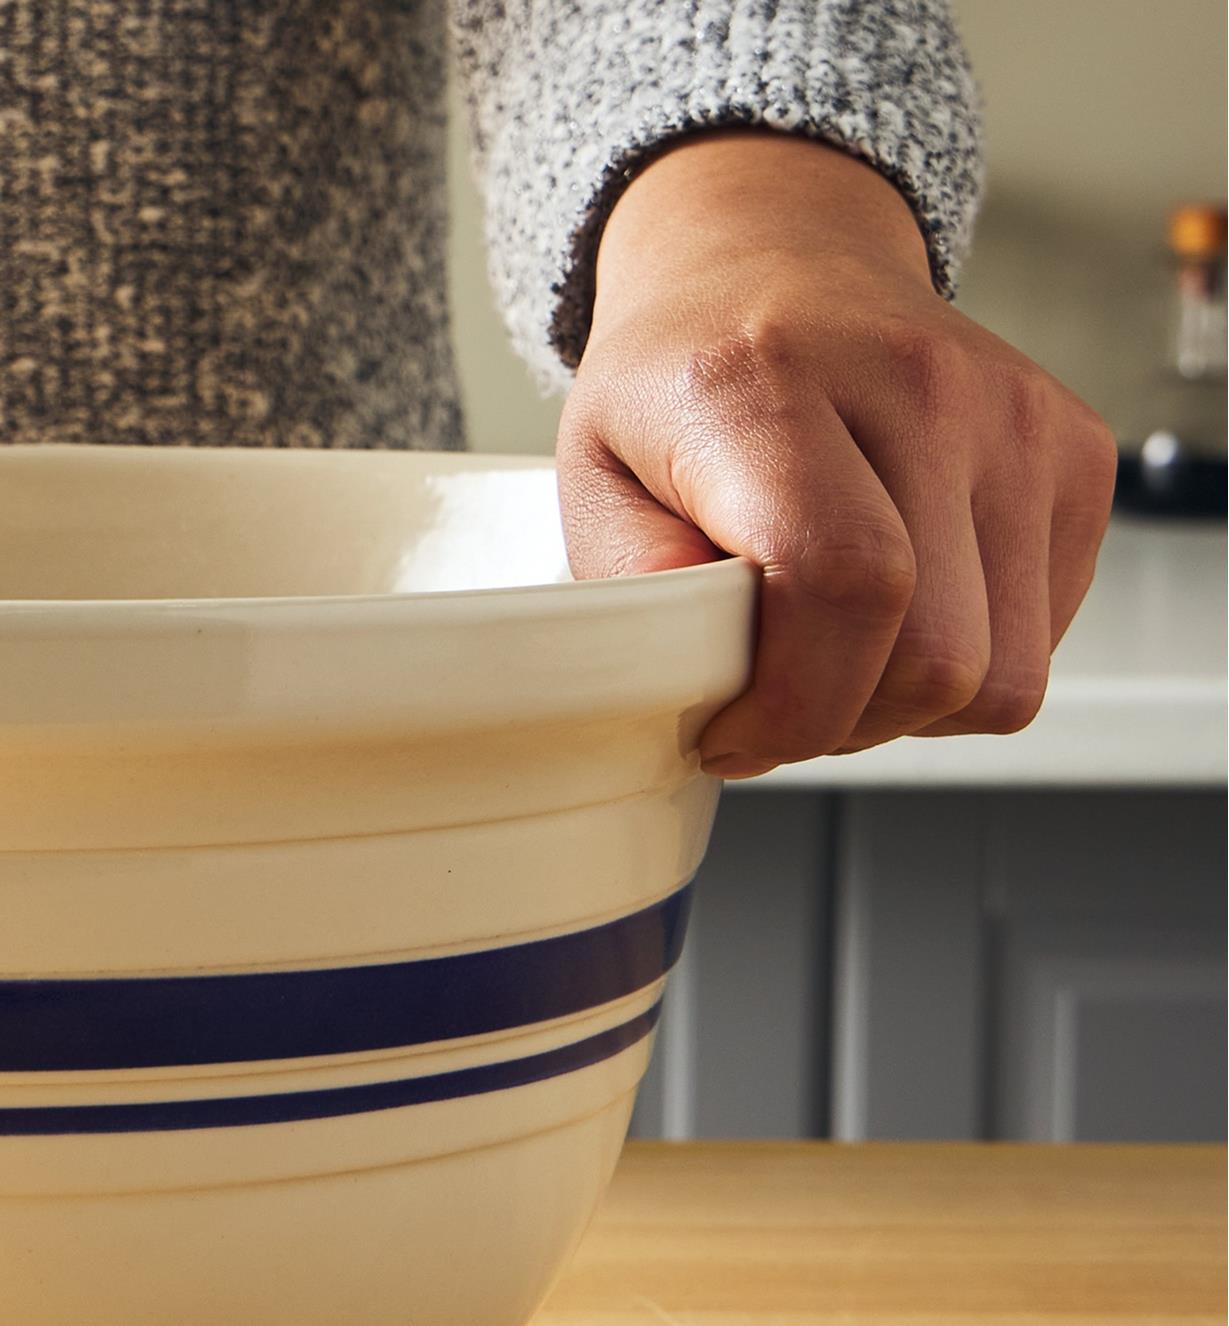 Close-up view of a hand gripping the lip of the Dominion mixing bowl